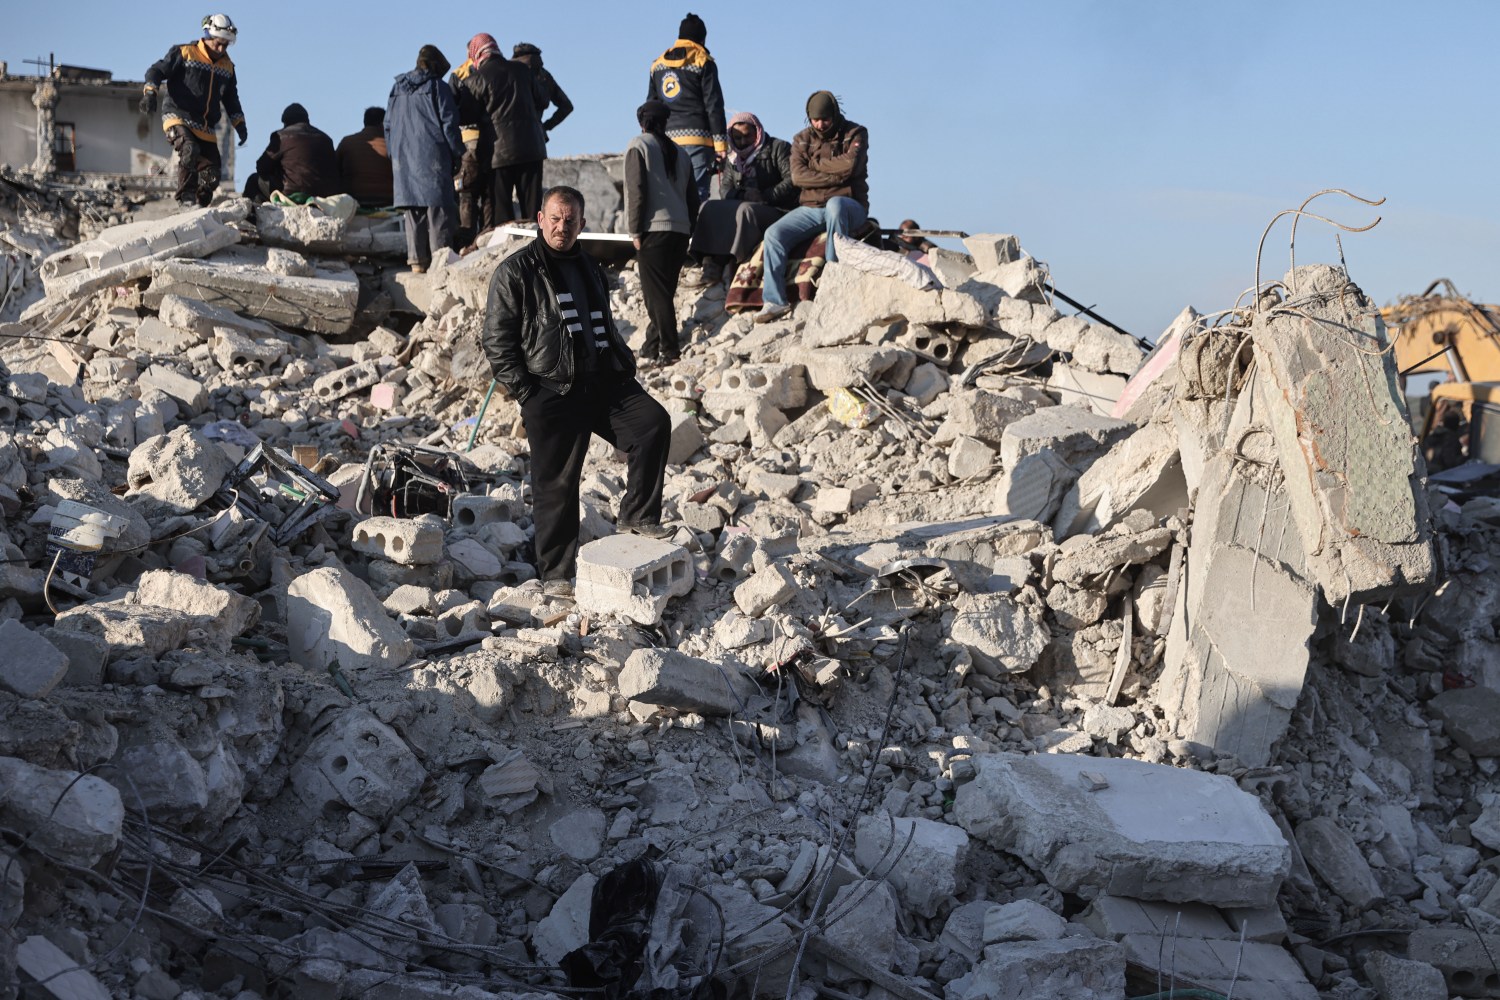 Civilians and White Helmets members inspect a building that collapsed in the city of Harem following the devastating earthquake that struck the Turkish-Syrian border and left more than 5000 people dead.